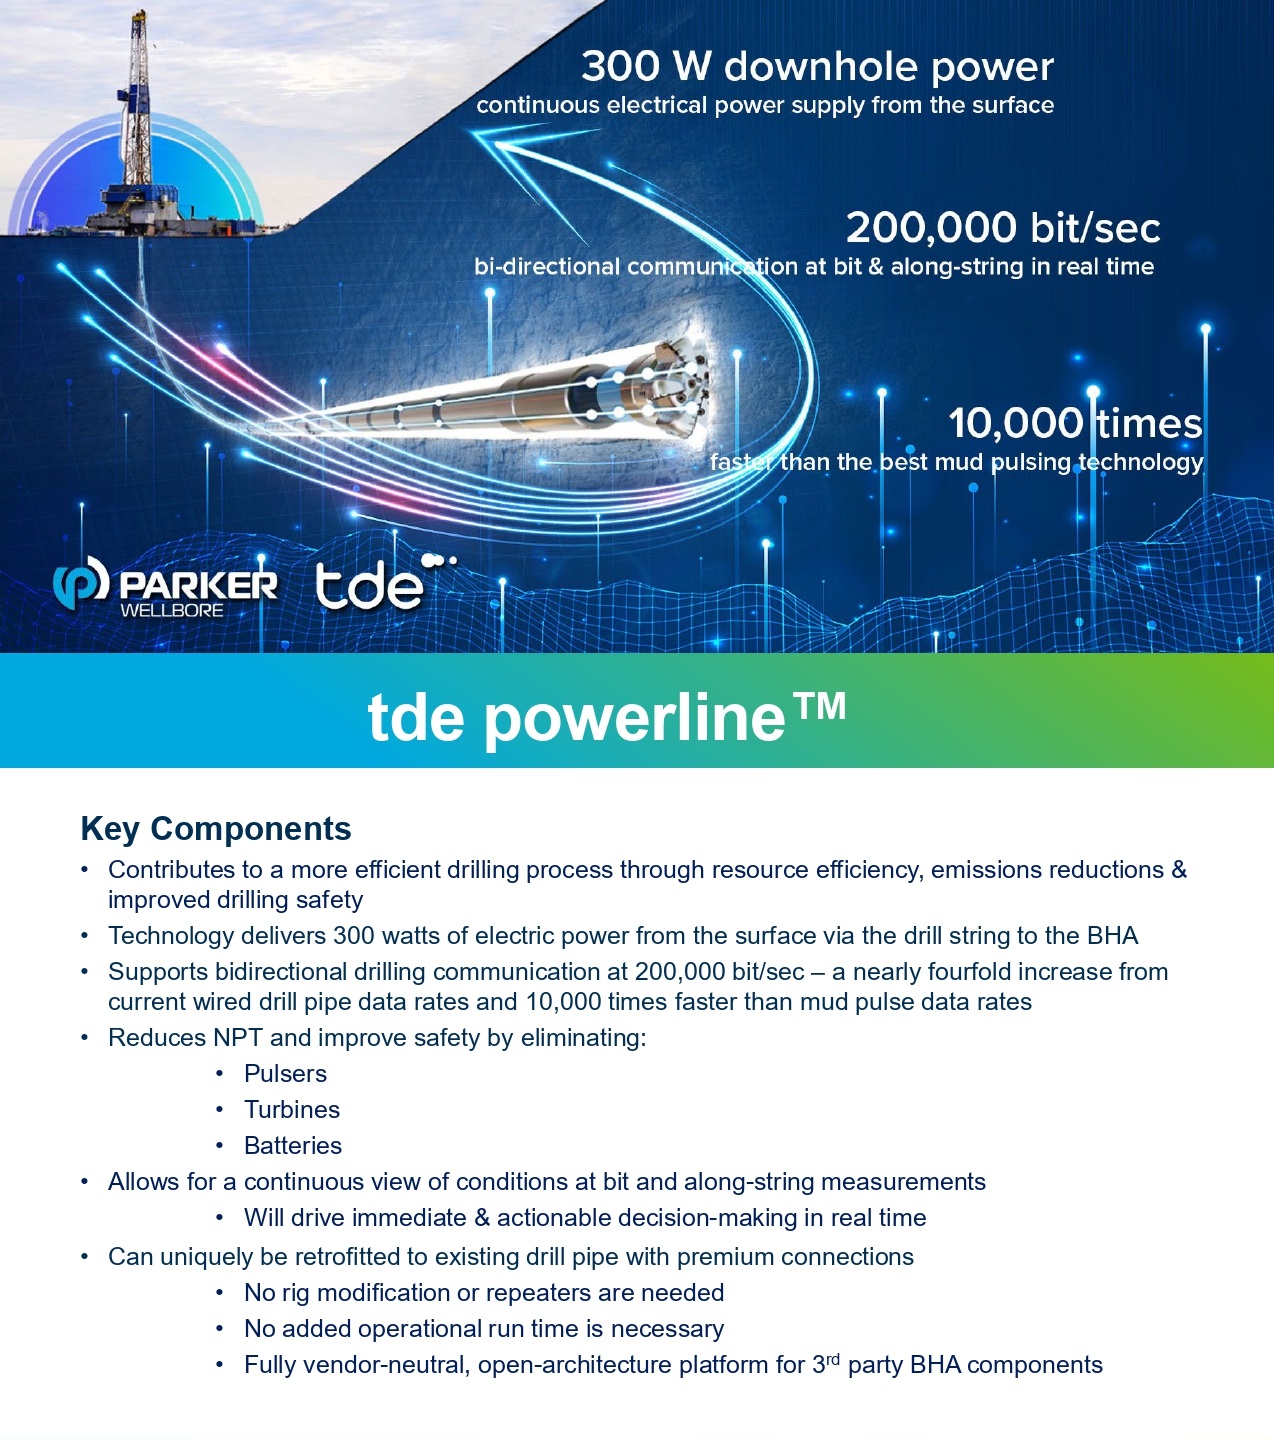 tde powerline Product Sheet 2 page 0001